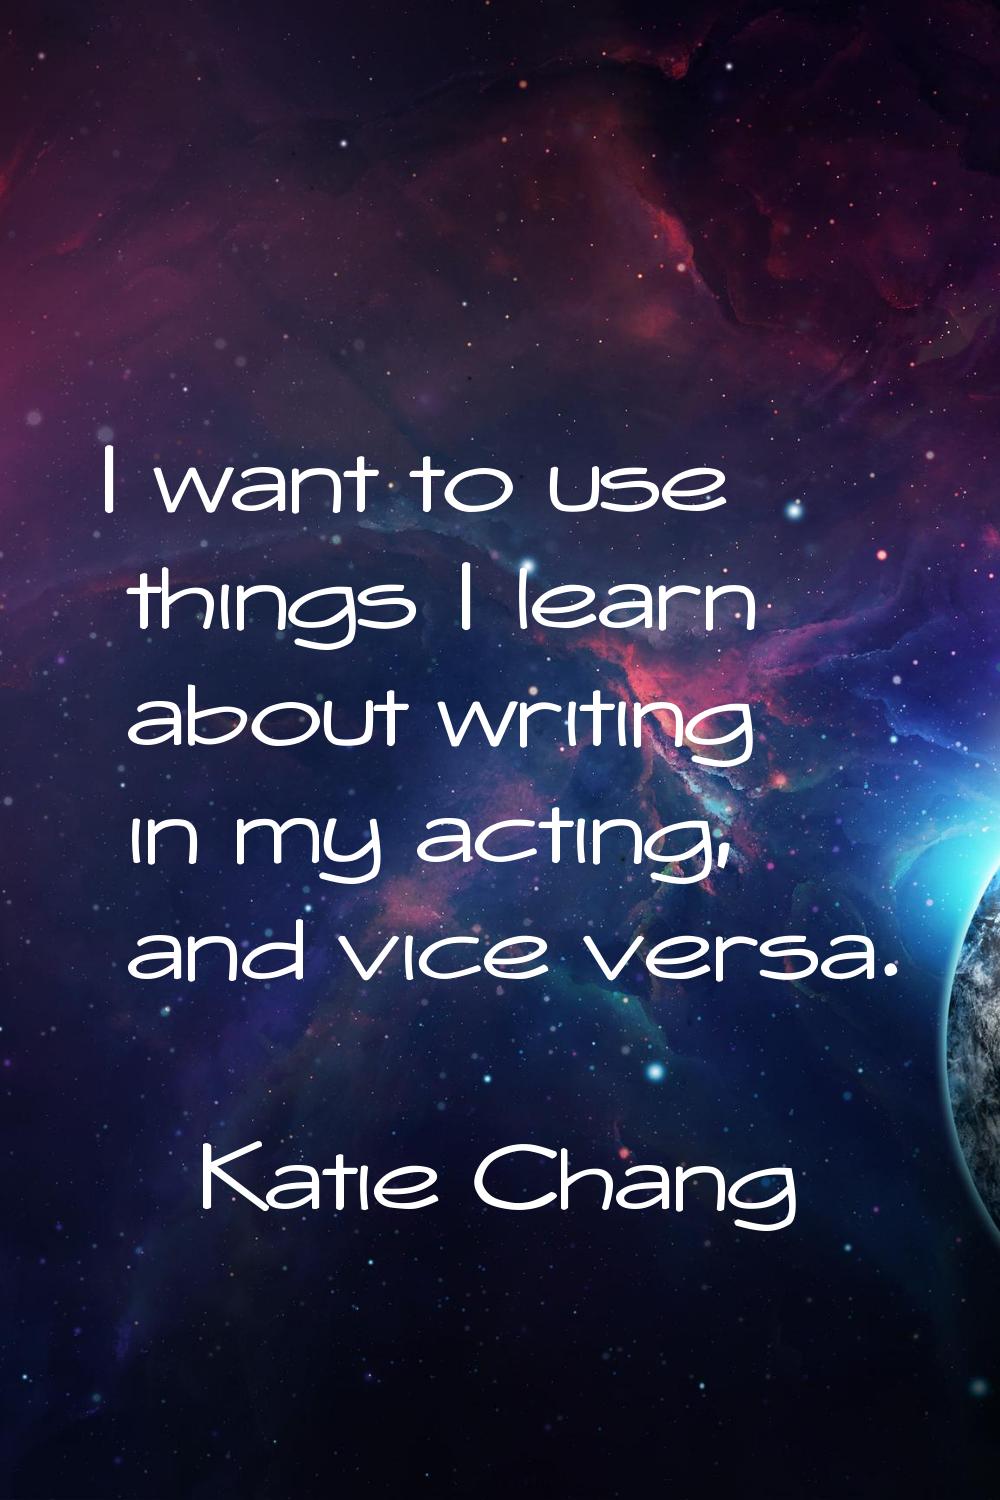 I want to use things I learn about writing in my acting, and vice versa.